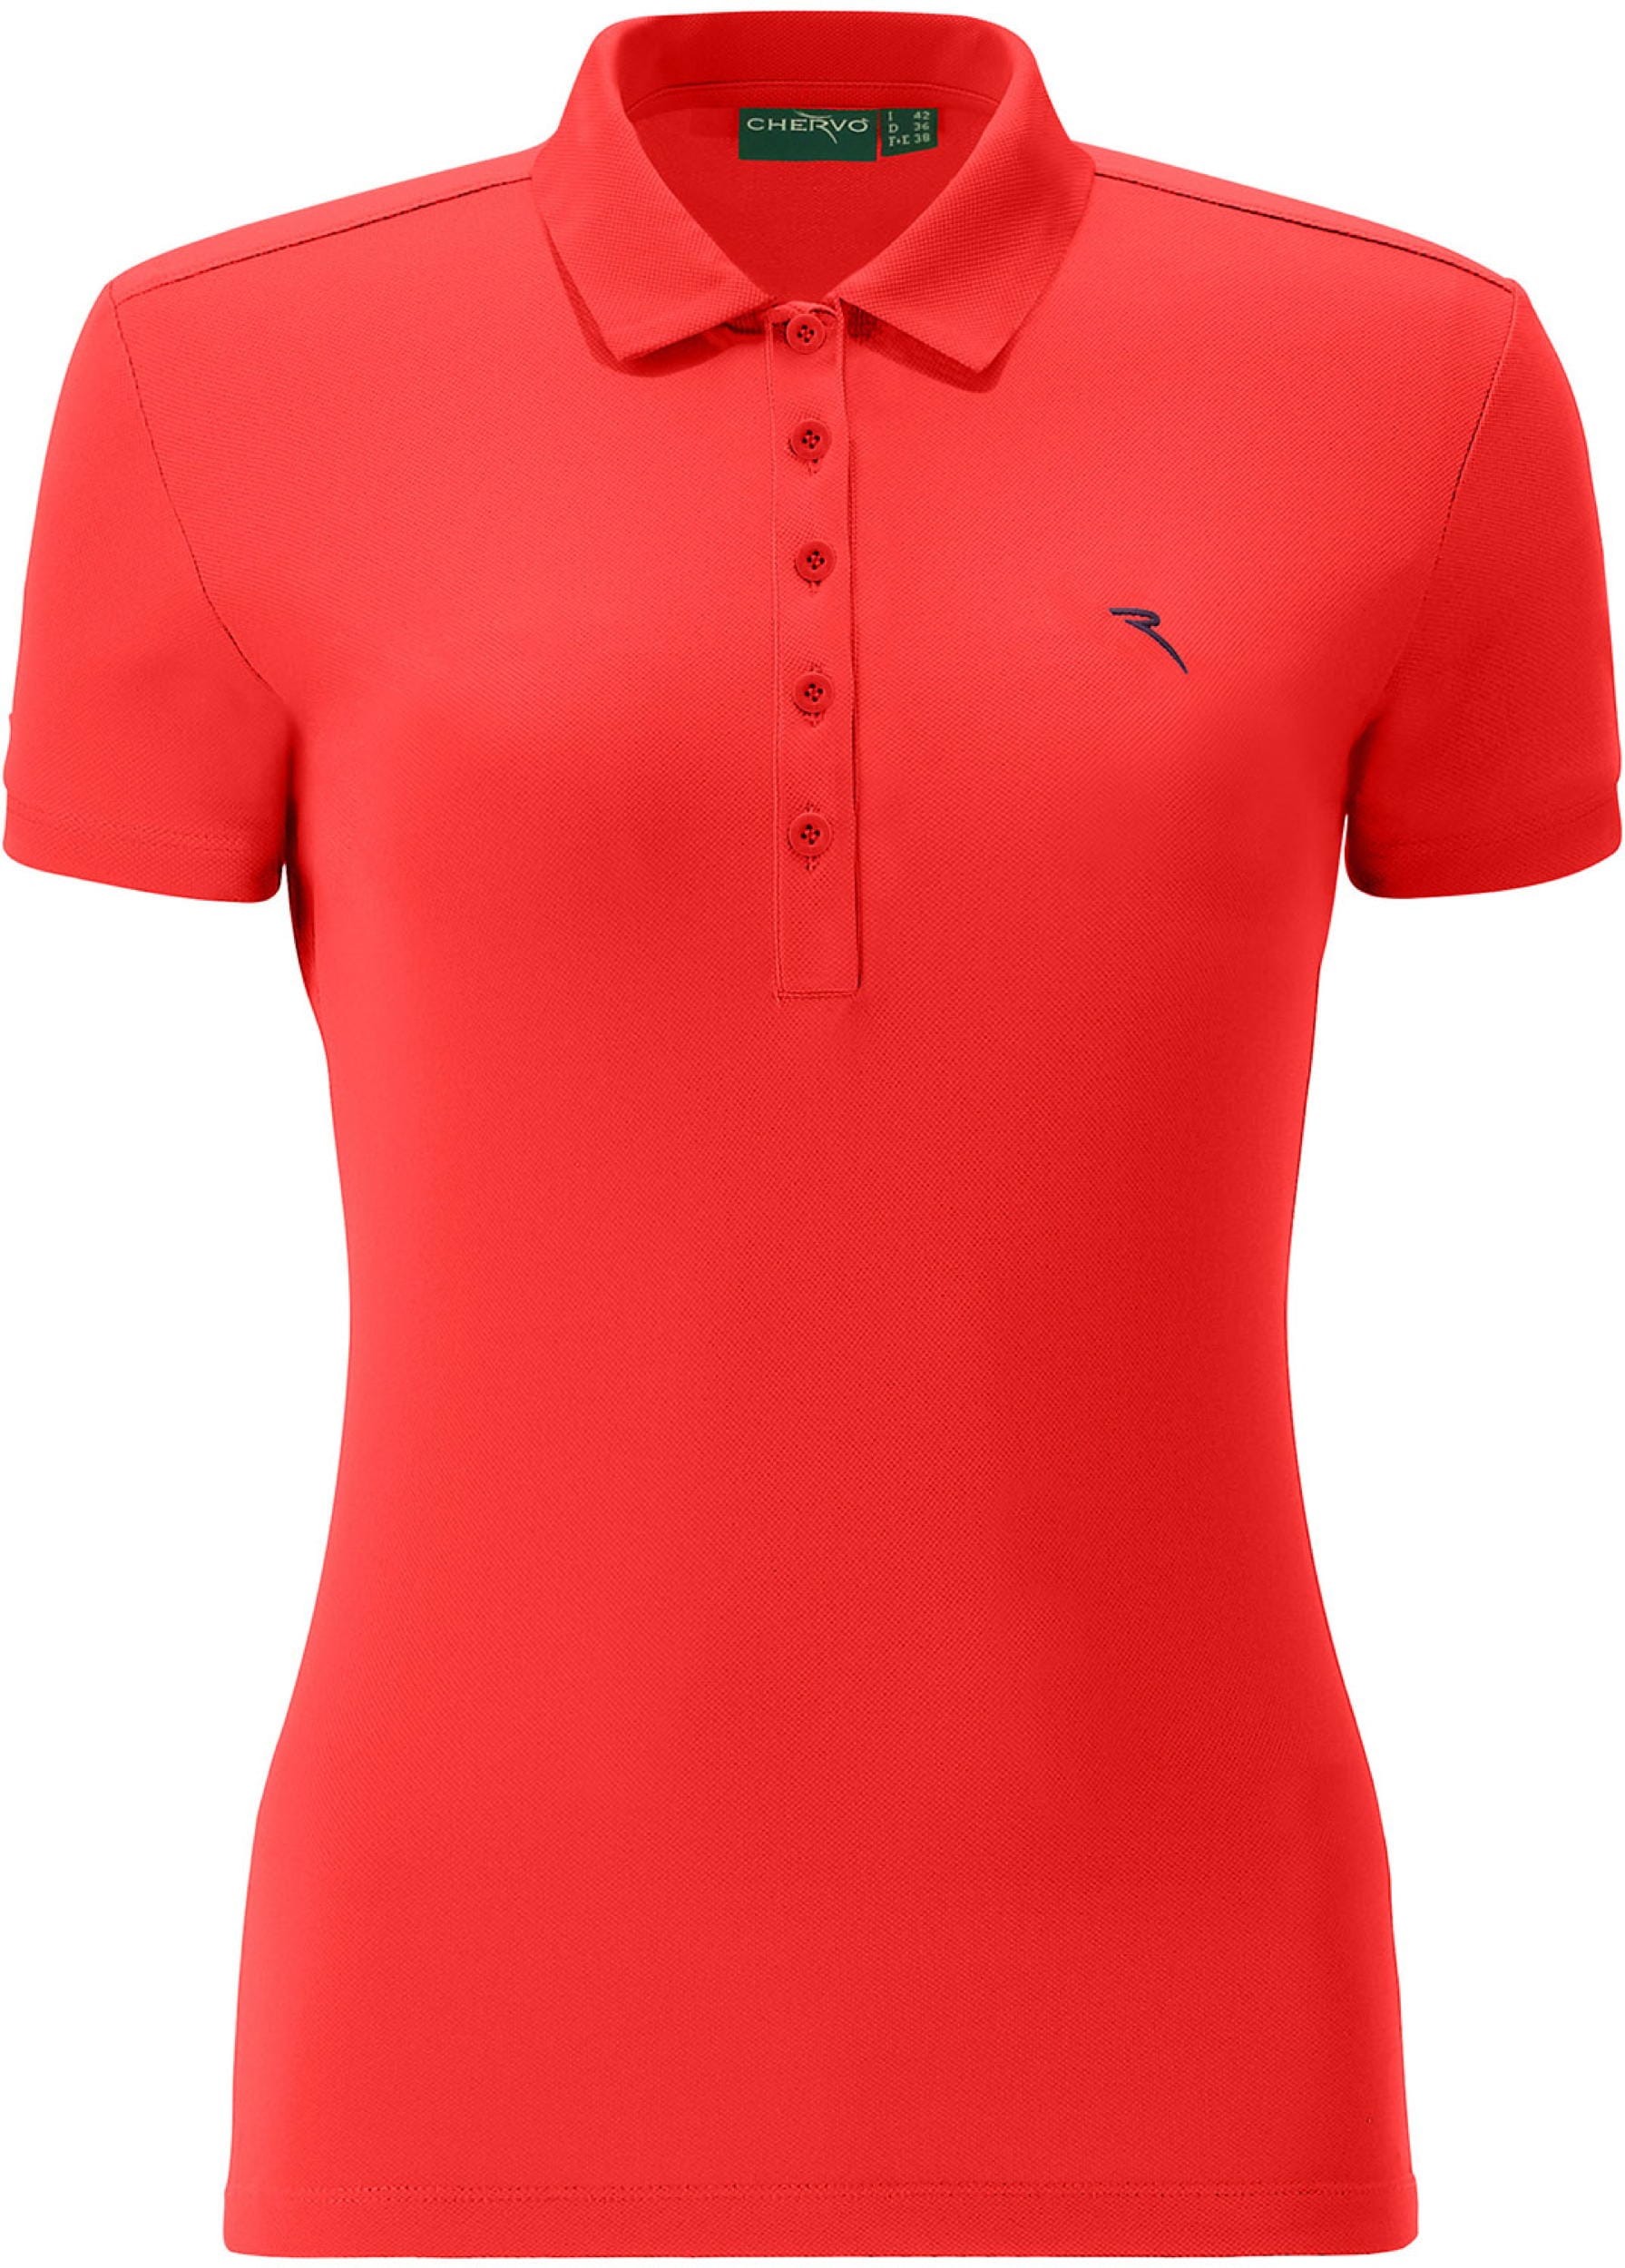 Chervo Appen DRY-MATIC Polo, red